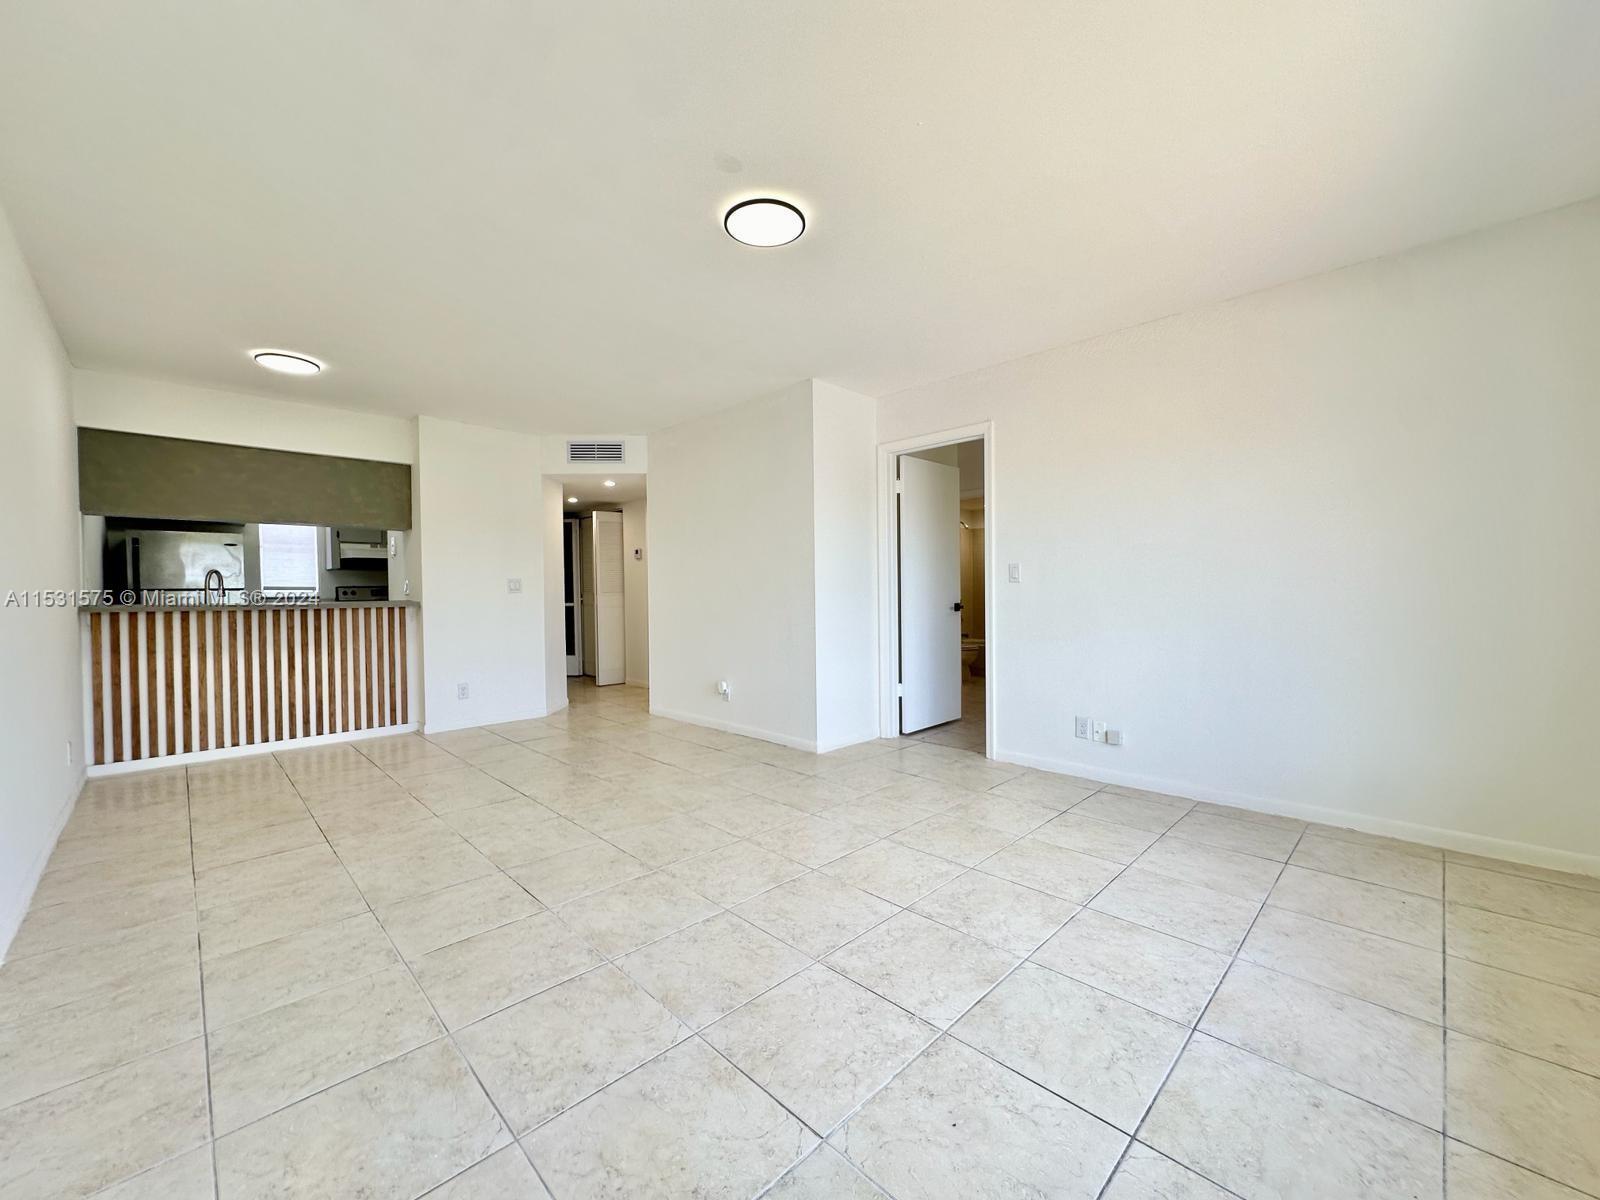 Photo of 910 Twin Lakes Dr #8-K in Coral Springs, FL